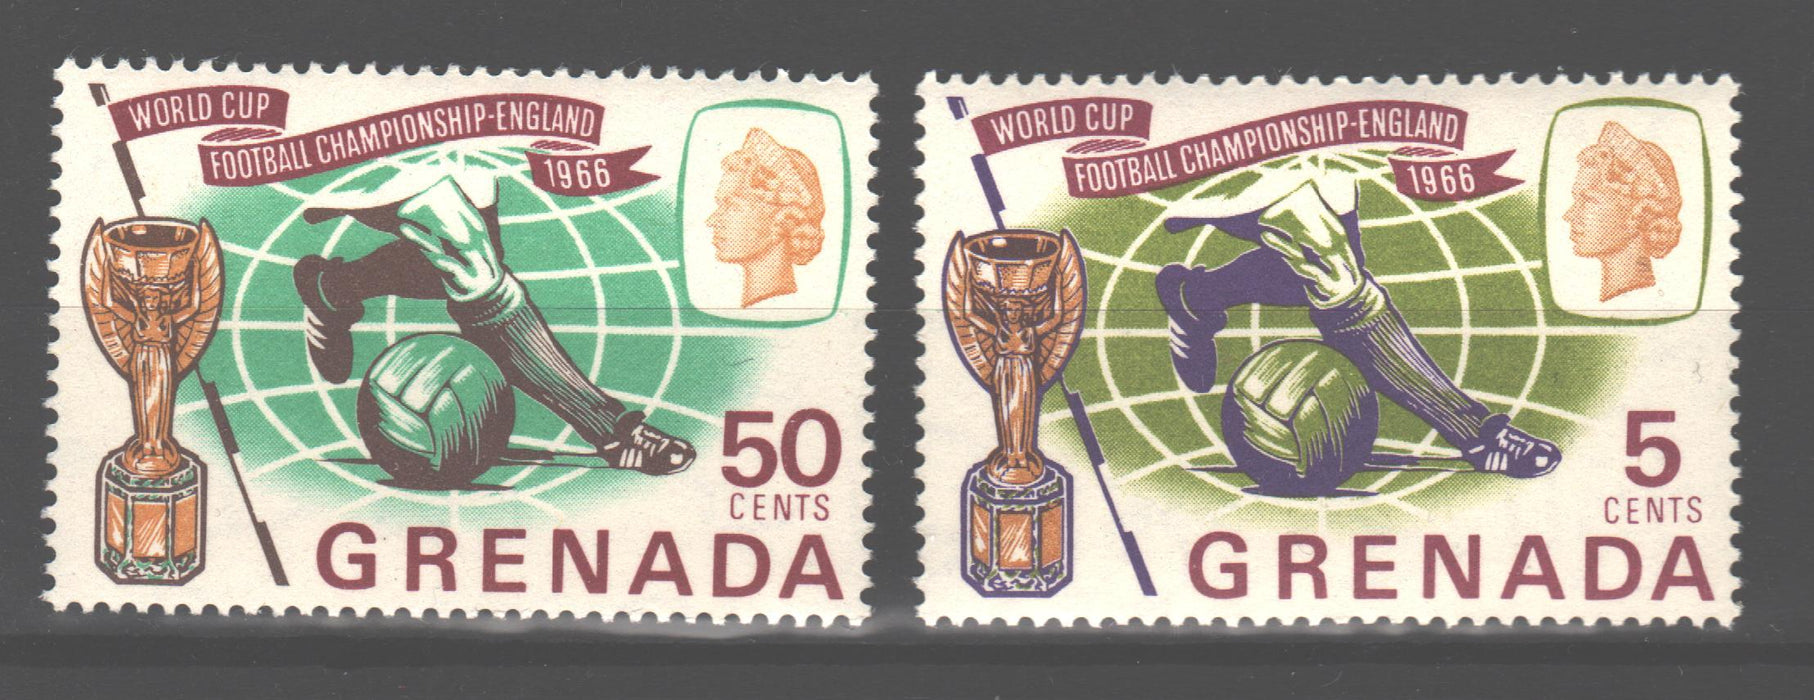 Grenada 1966 World Cup Soccer Issue Scott #230-231 c.v. 0.65$ - (TIP A) in Stamps Mall